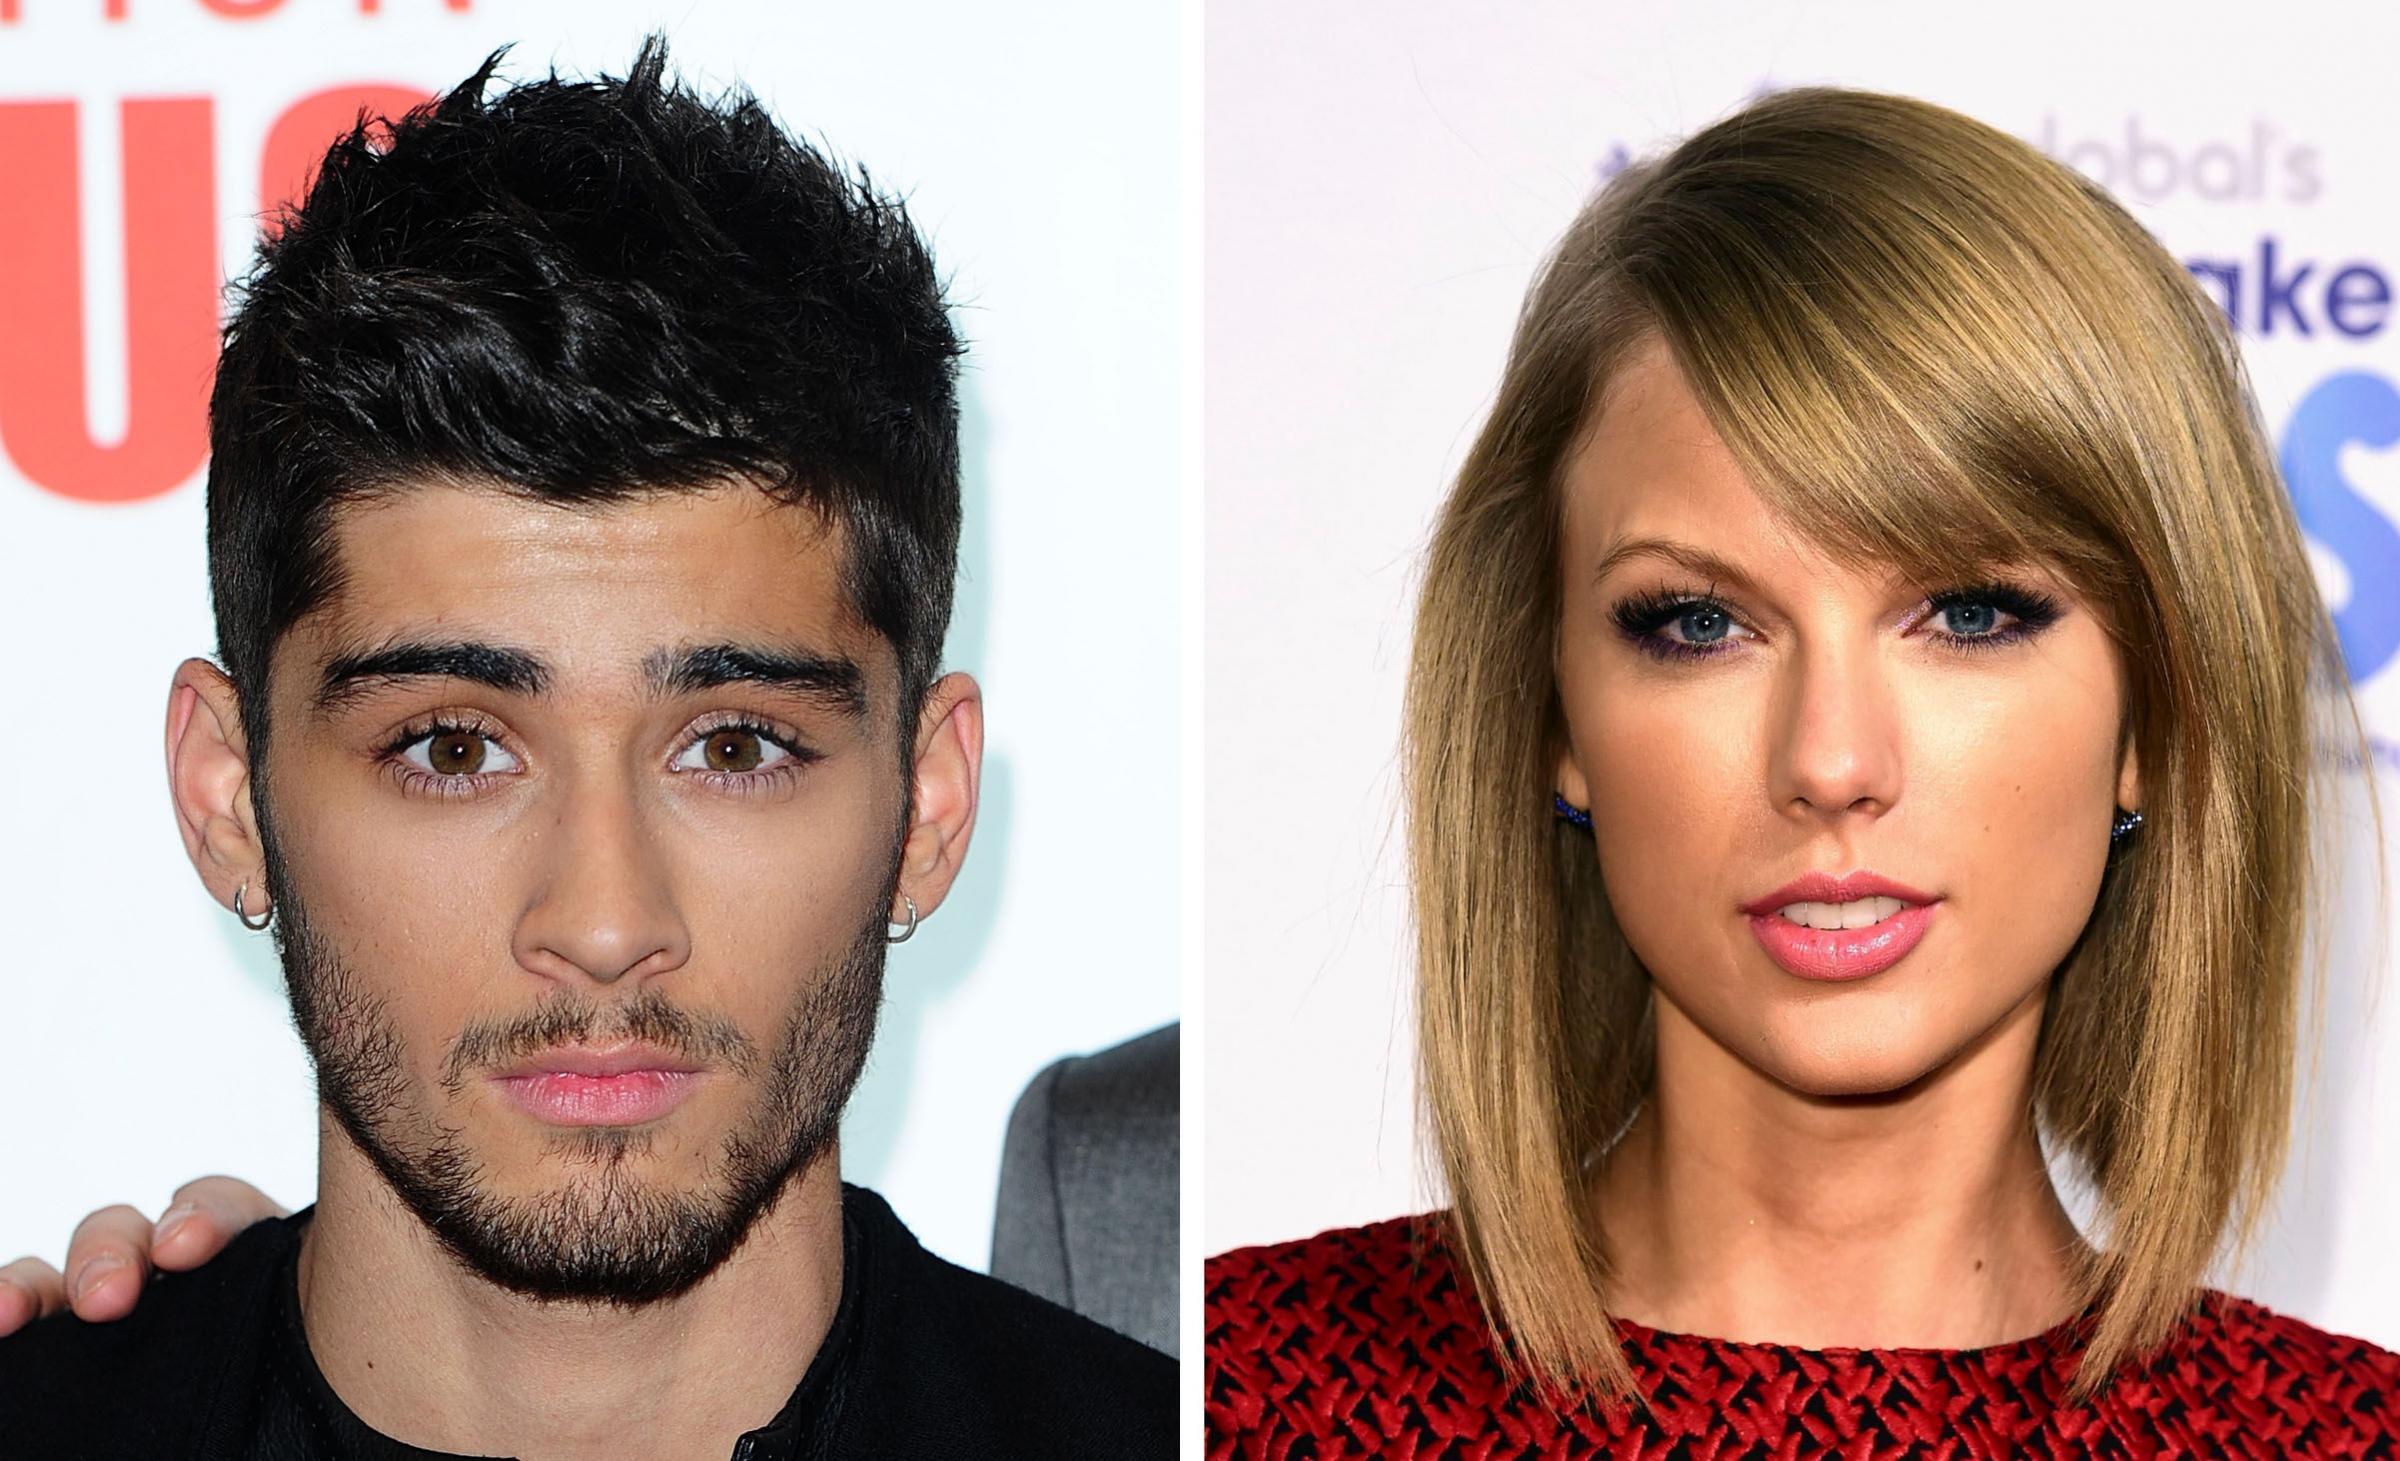 VIDEO: See Zayn Malik and Taylor Swift wreck hotel room for new Fifty Shades song